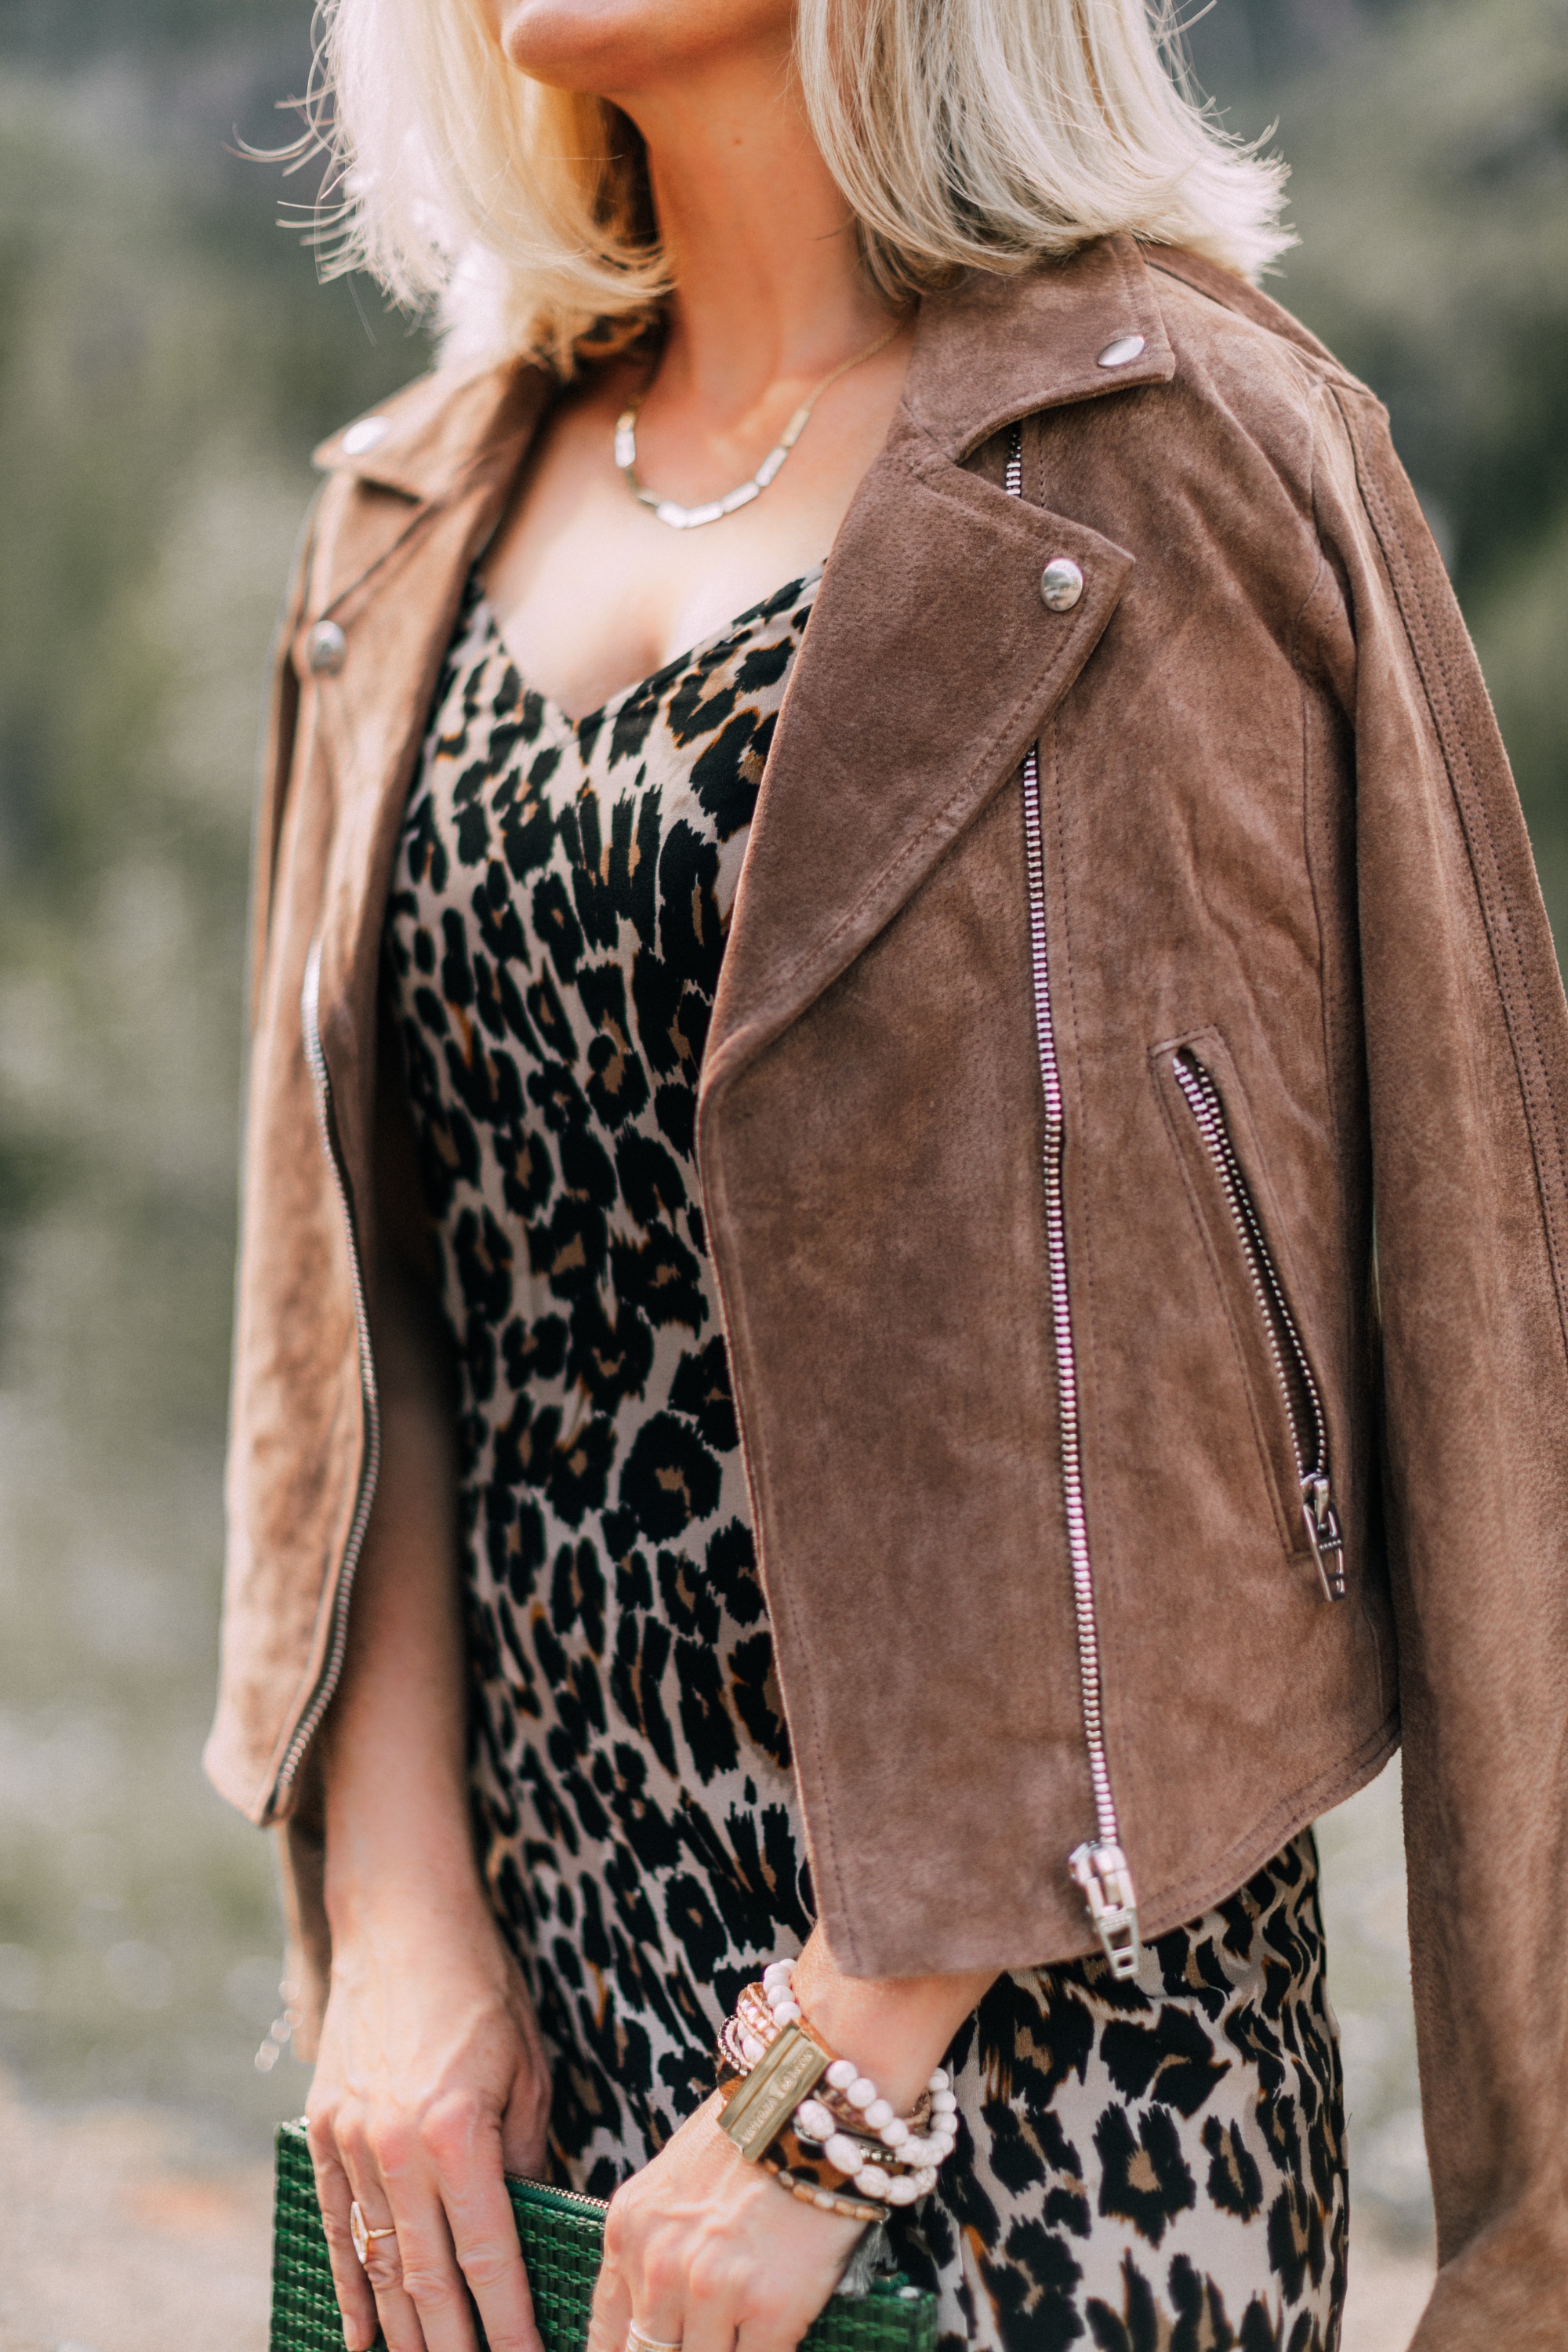 Styling animal print clothes with neutral Accessories, Fashion blogger Erin Busbee of BusbeeStyle,com wearing leopard print slip dress, blanknyc tan suede moto jacket, tan suede peep-toe mules and a green woven clutch by Vince Camuto in Telluride, CO